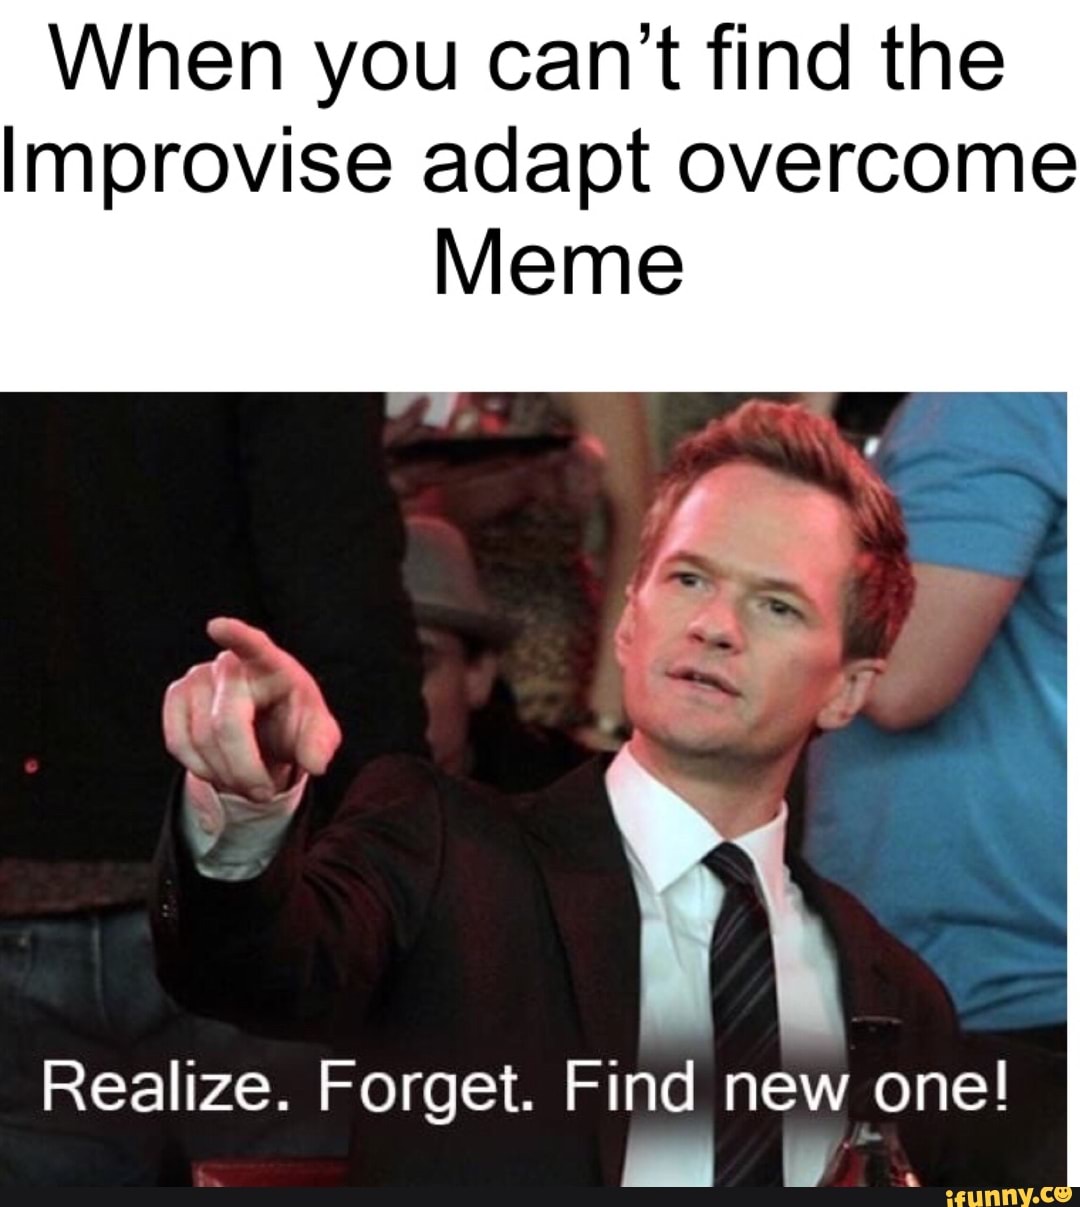 When you can’t find the Improvise adapt overcome Meme Realize. Forget